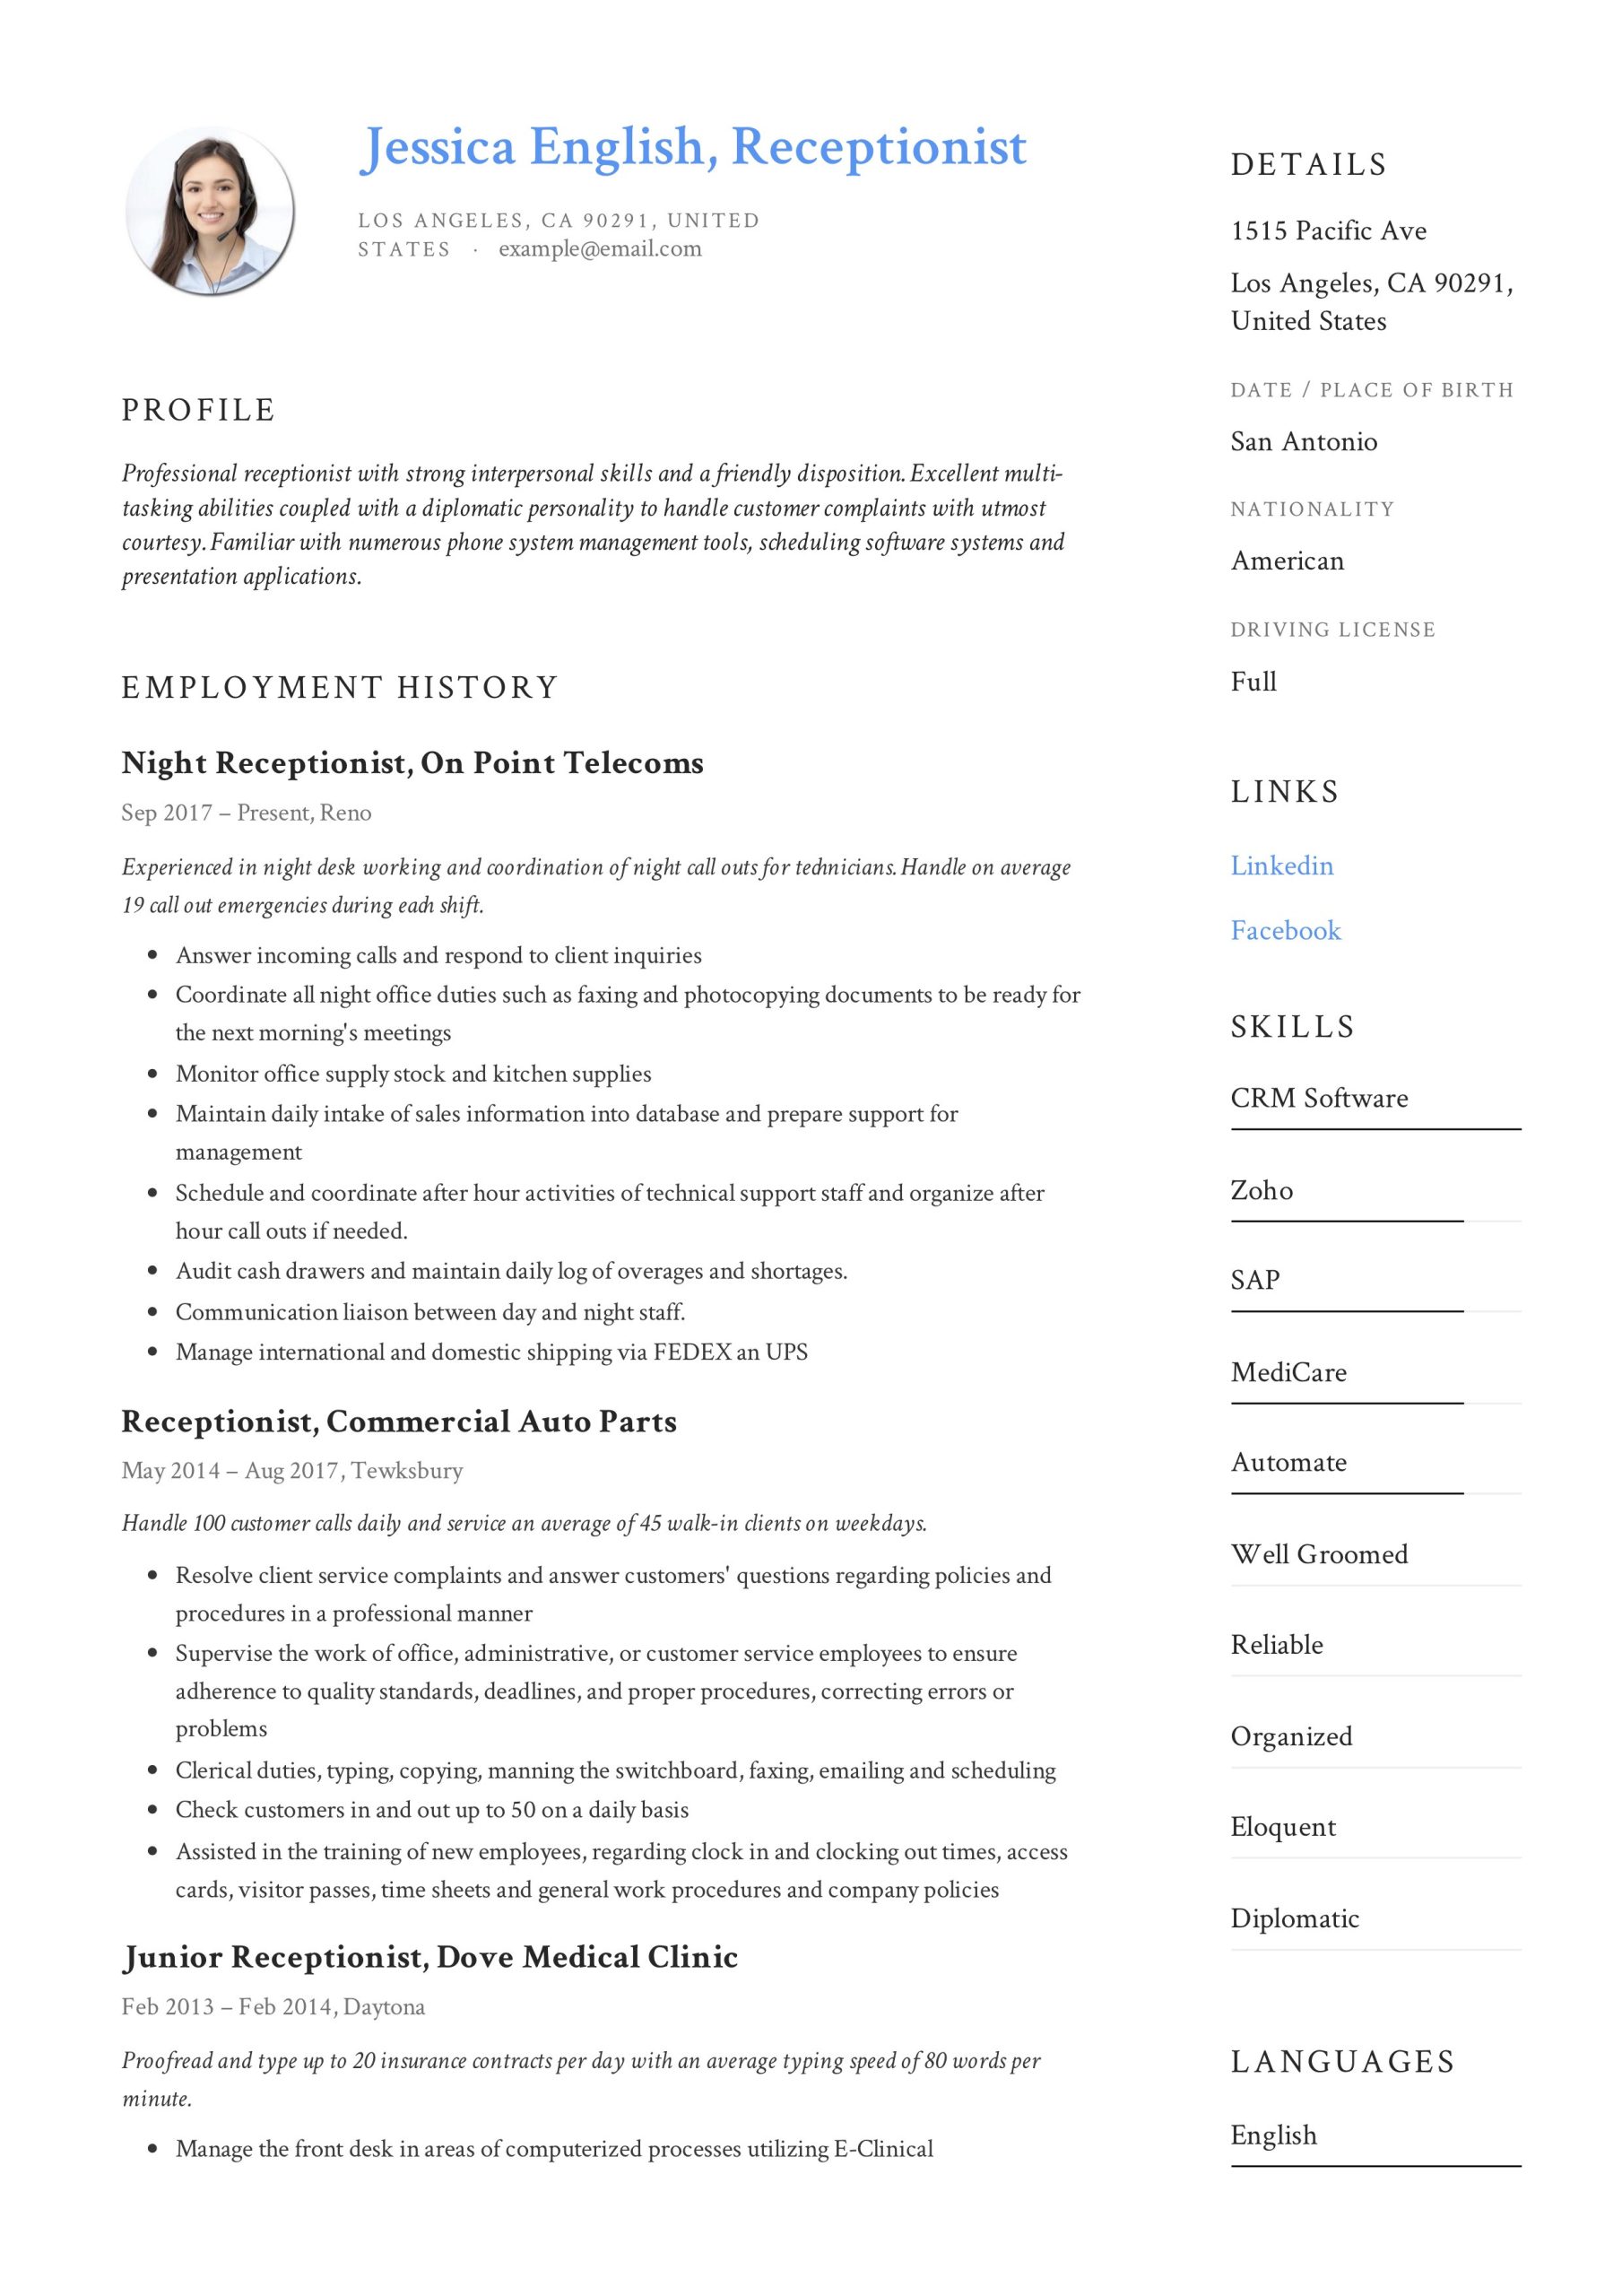 Sample Resume for Front Office Receptionist In India Receptionist Resume Example & Writing Guide 12 Samples Pdf 2020